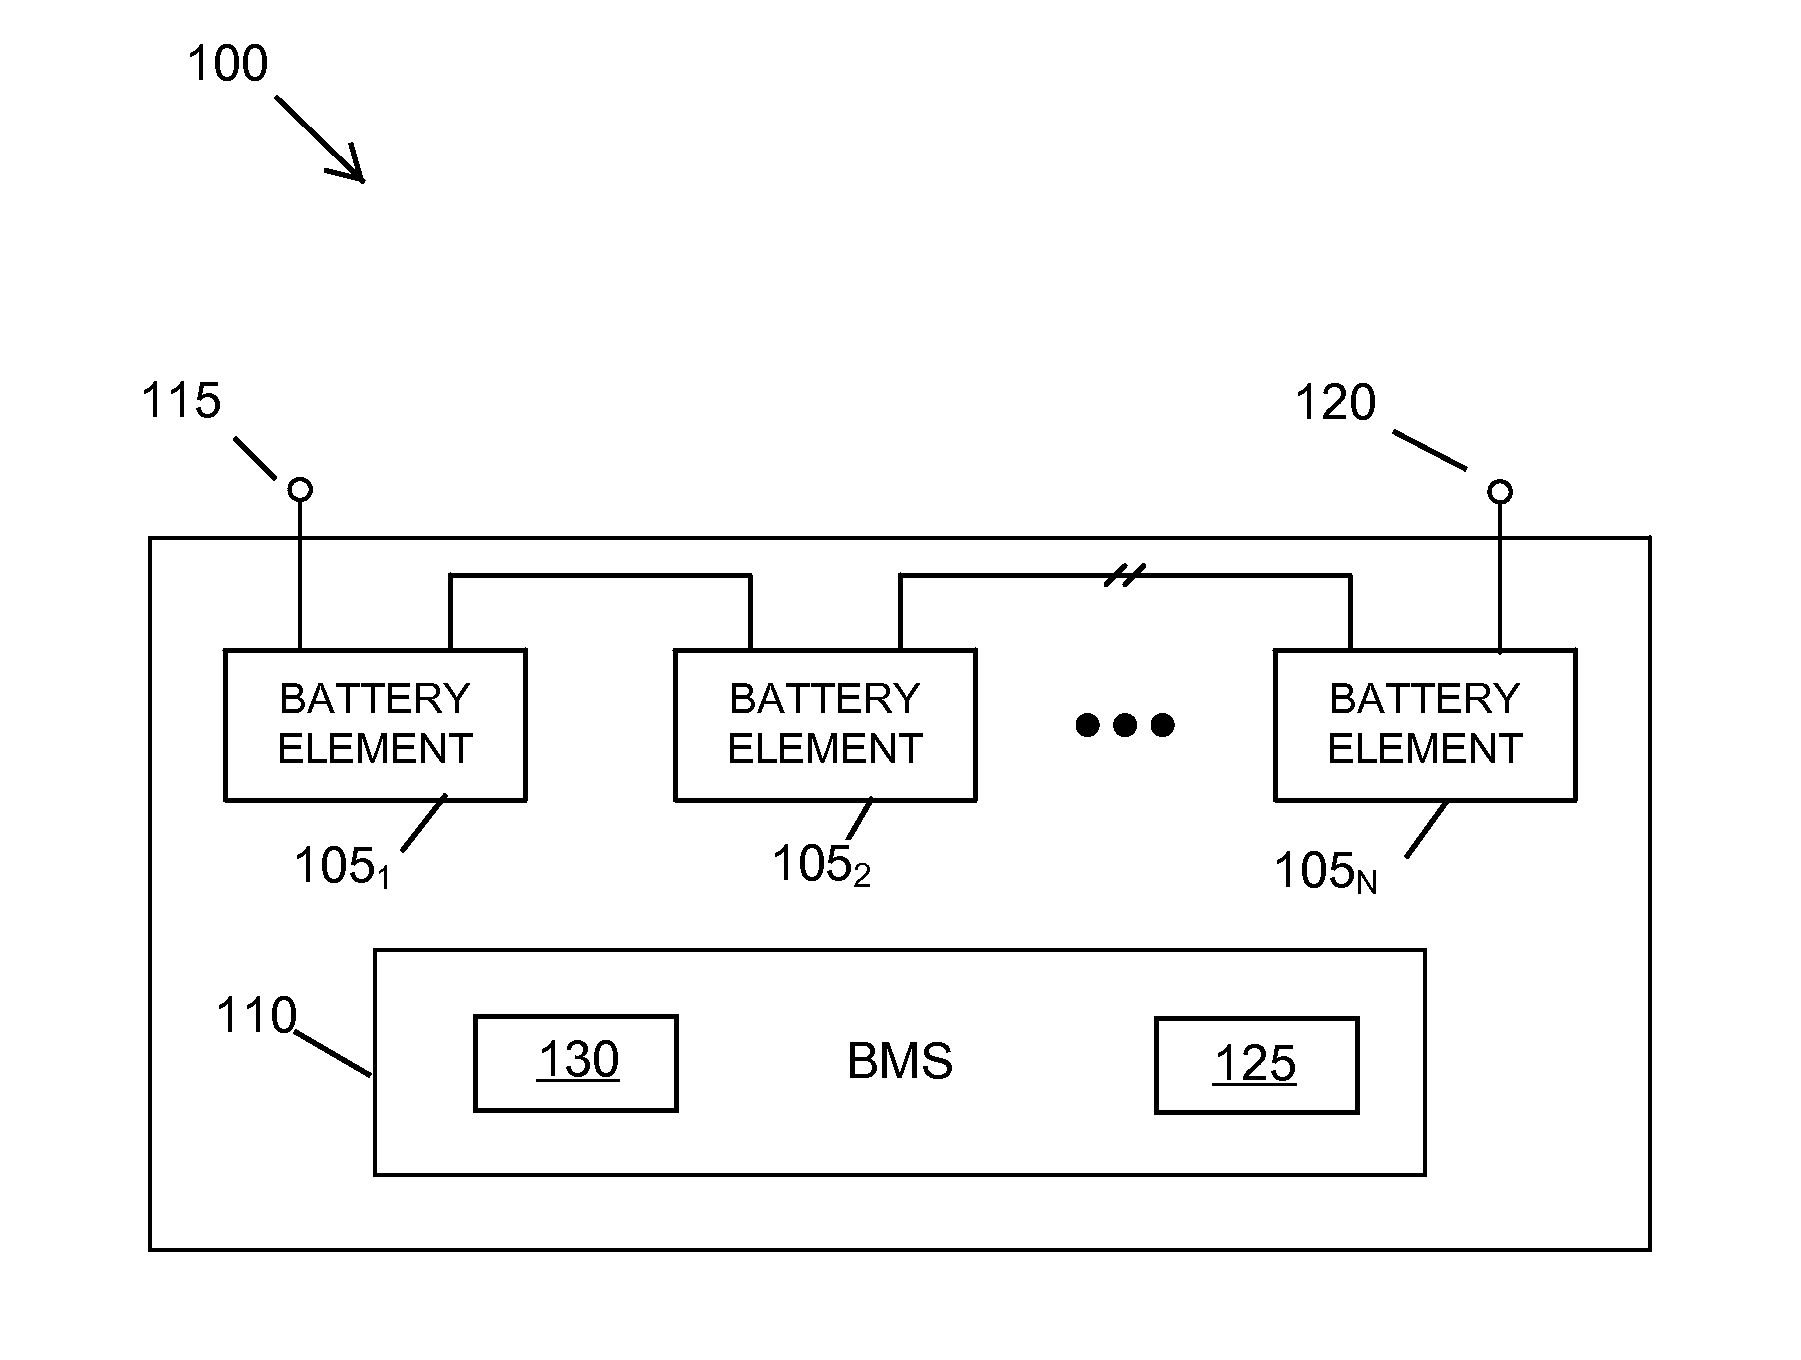 Steady state detection of an exceptional charge event in a series connected battery element